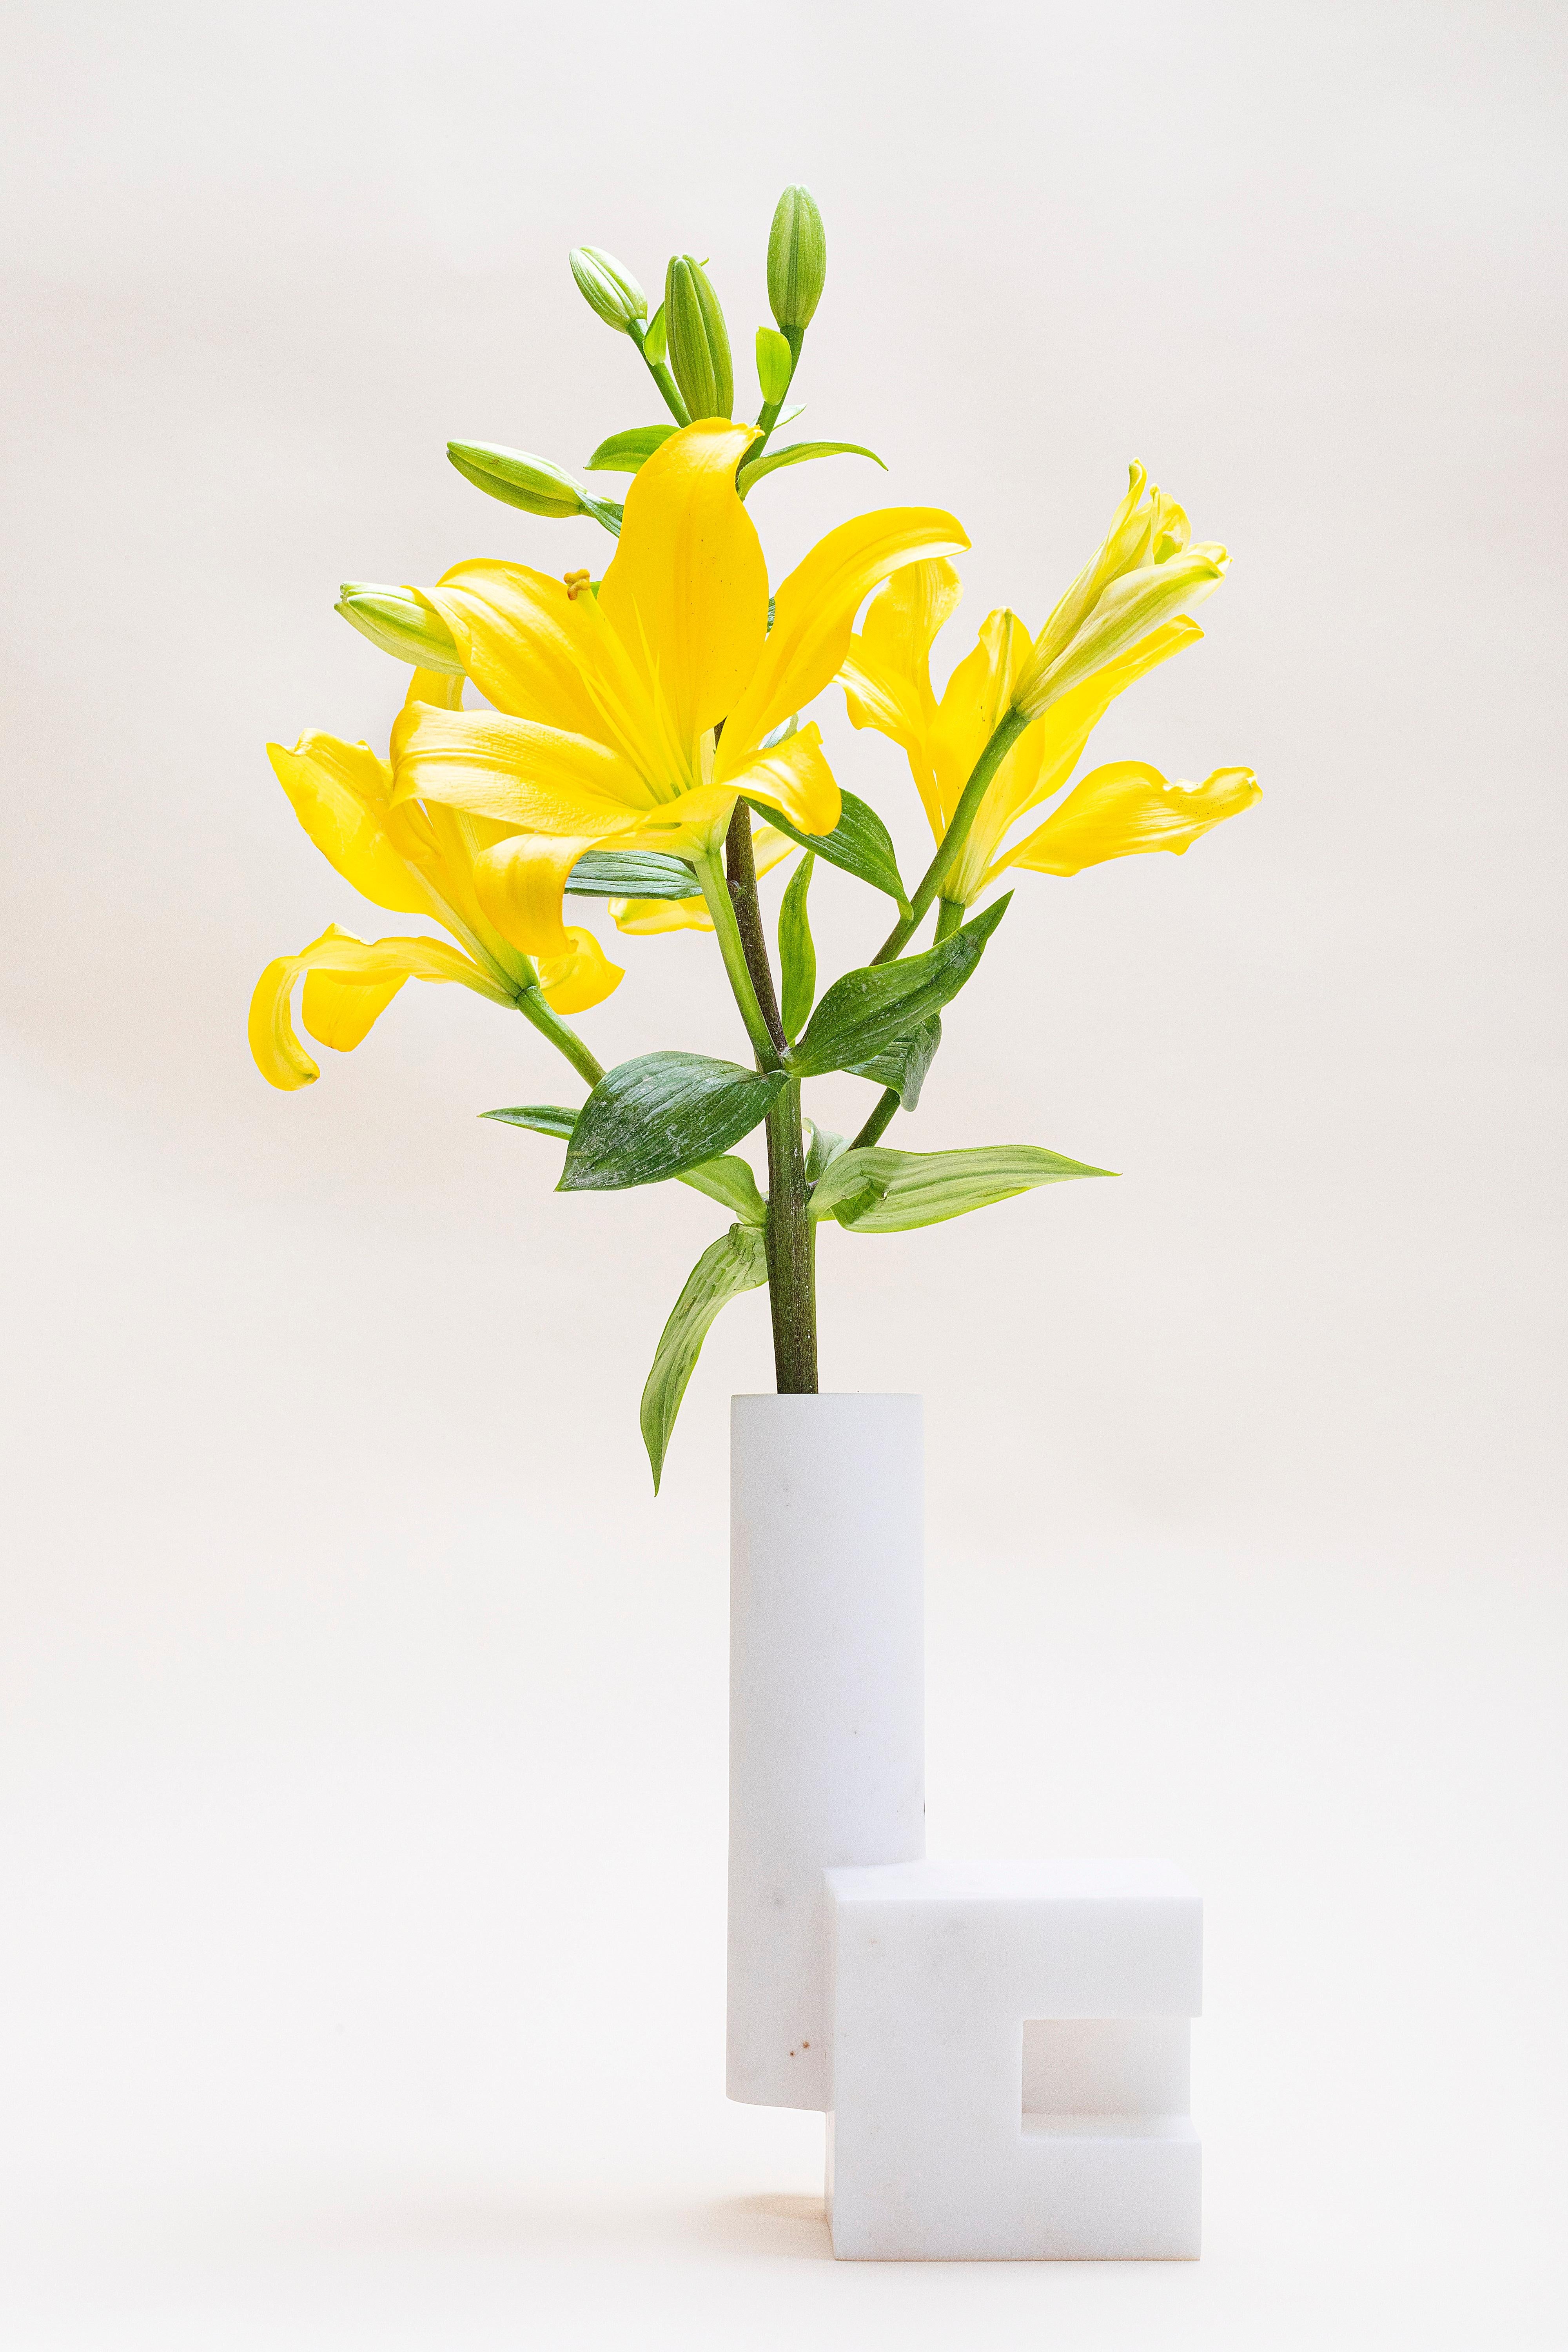 Contemporary Florero Tubo Galeana Vase by Jorge Diego Etienne For Sale